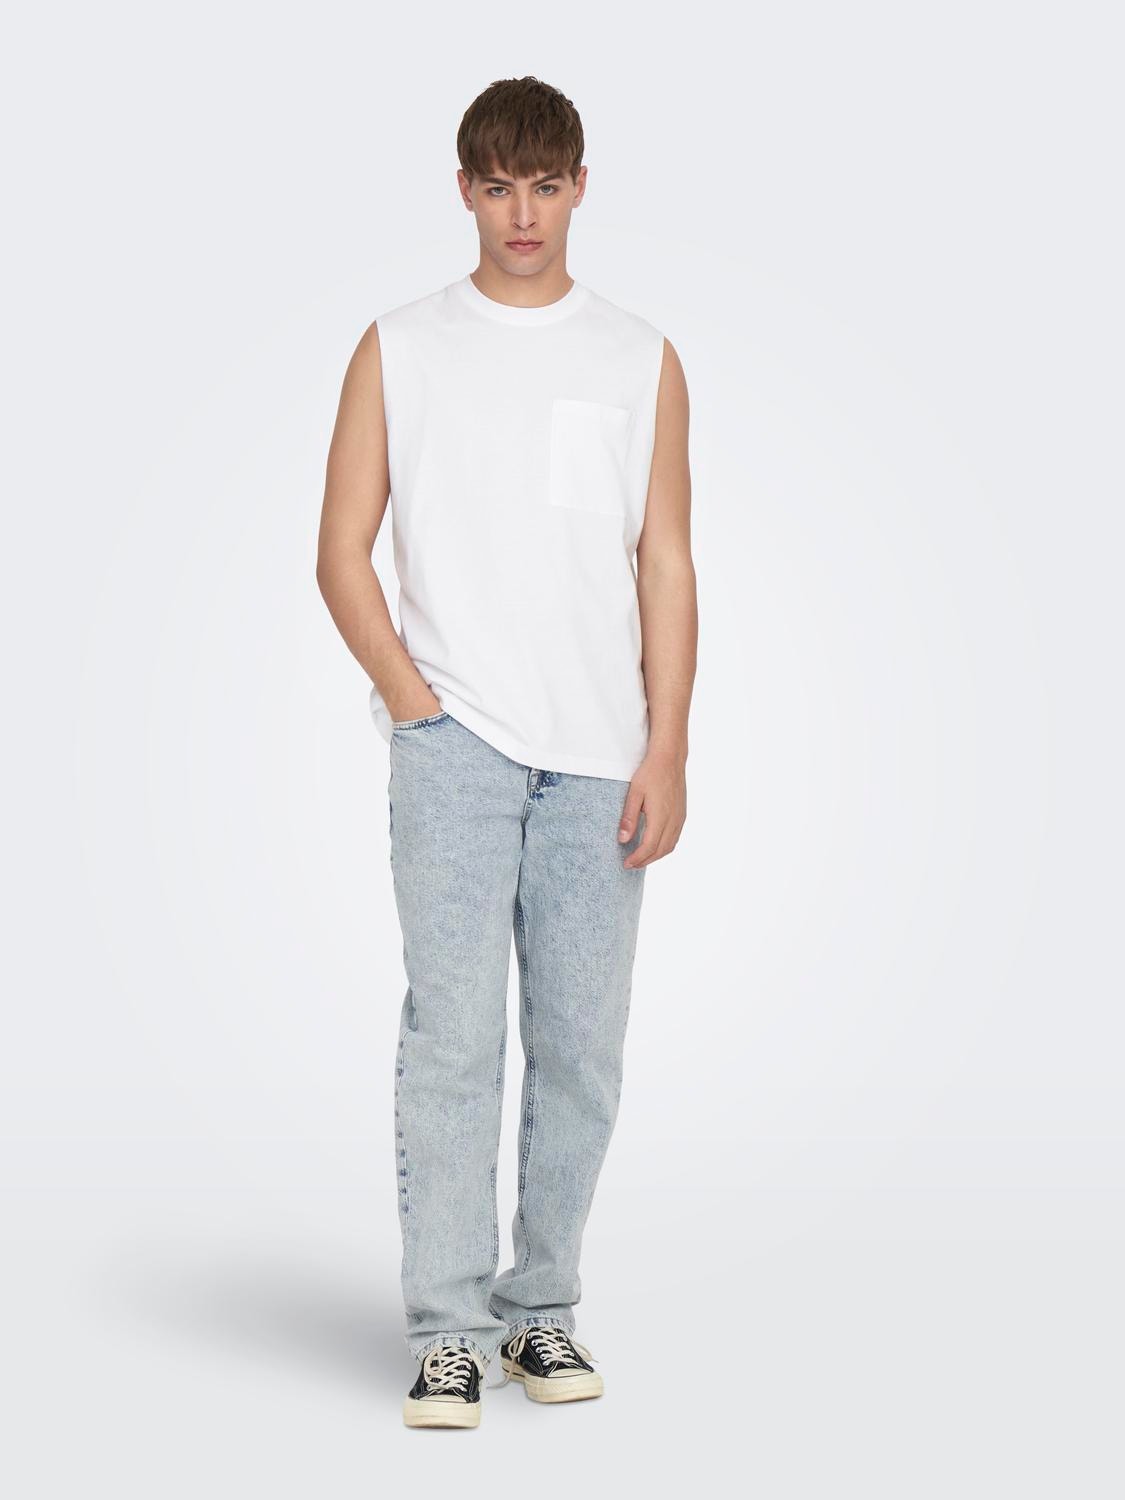 ONLY & SONS Relaxed Fit Round Neck T-Shirt -White - 22025300